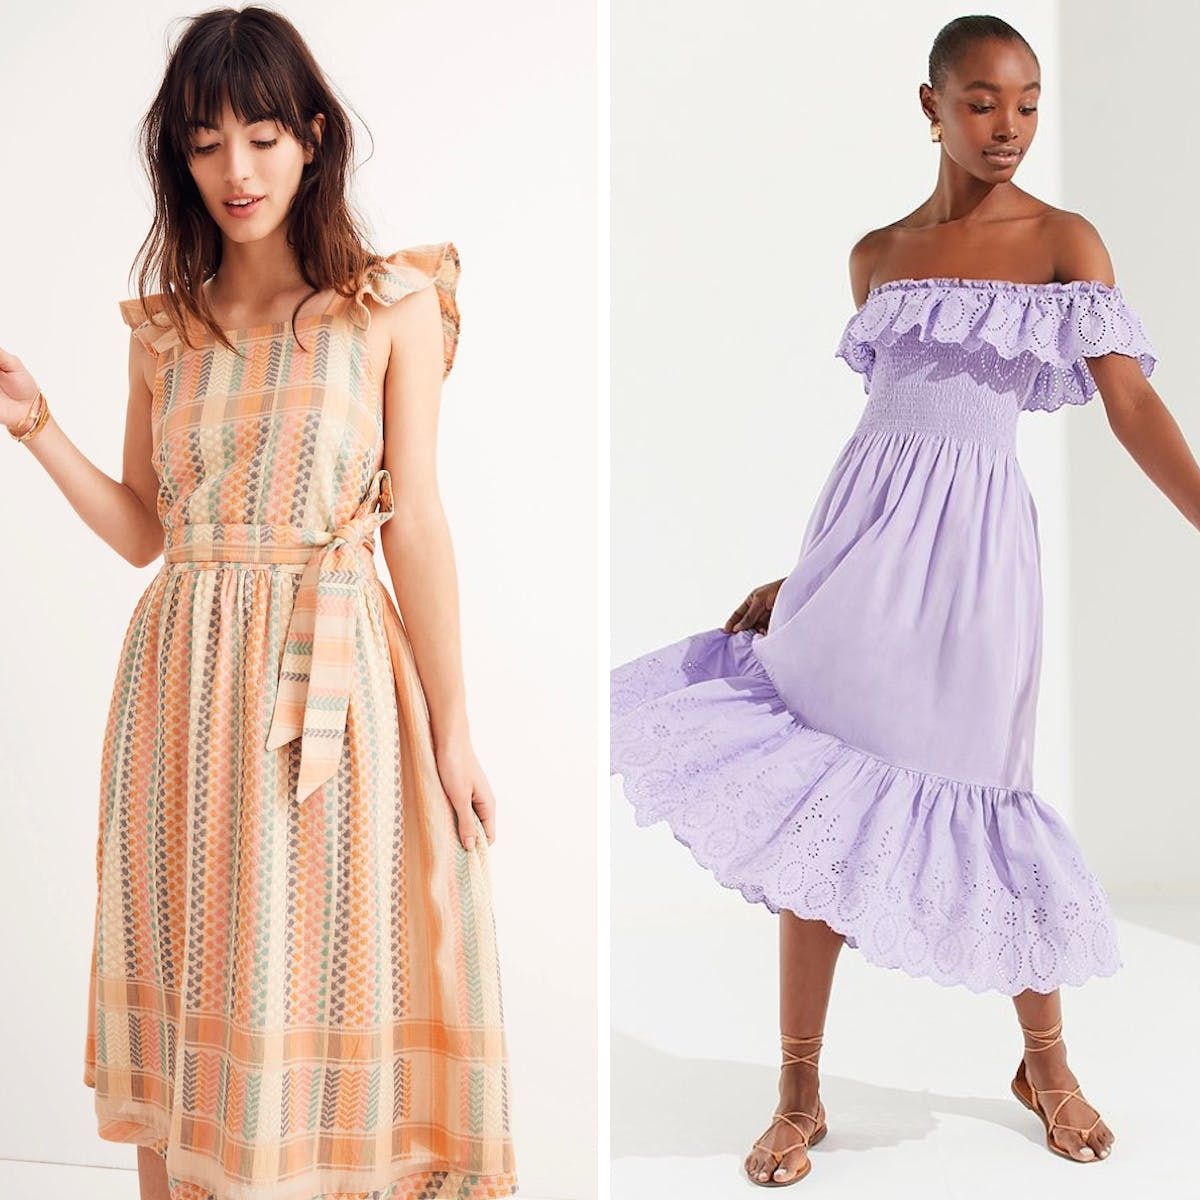 26 Honeymoon Dresses to Pack After the Wedding